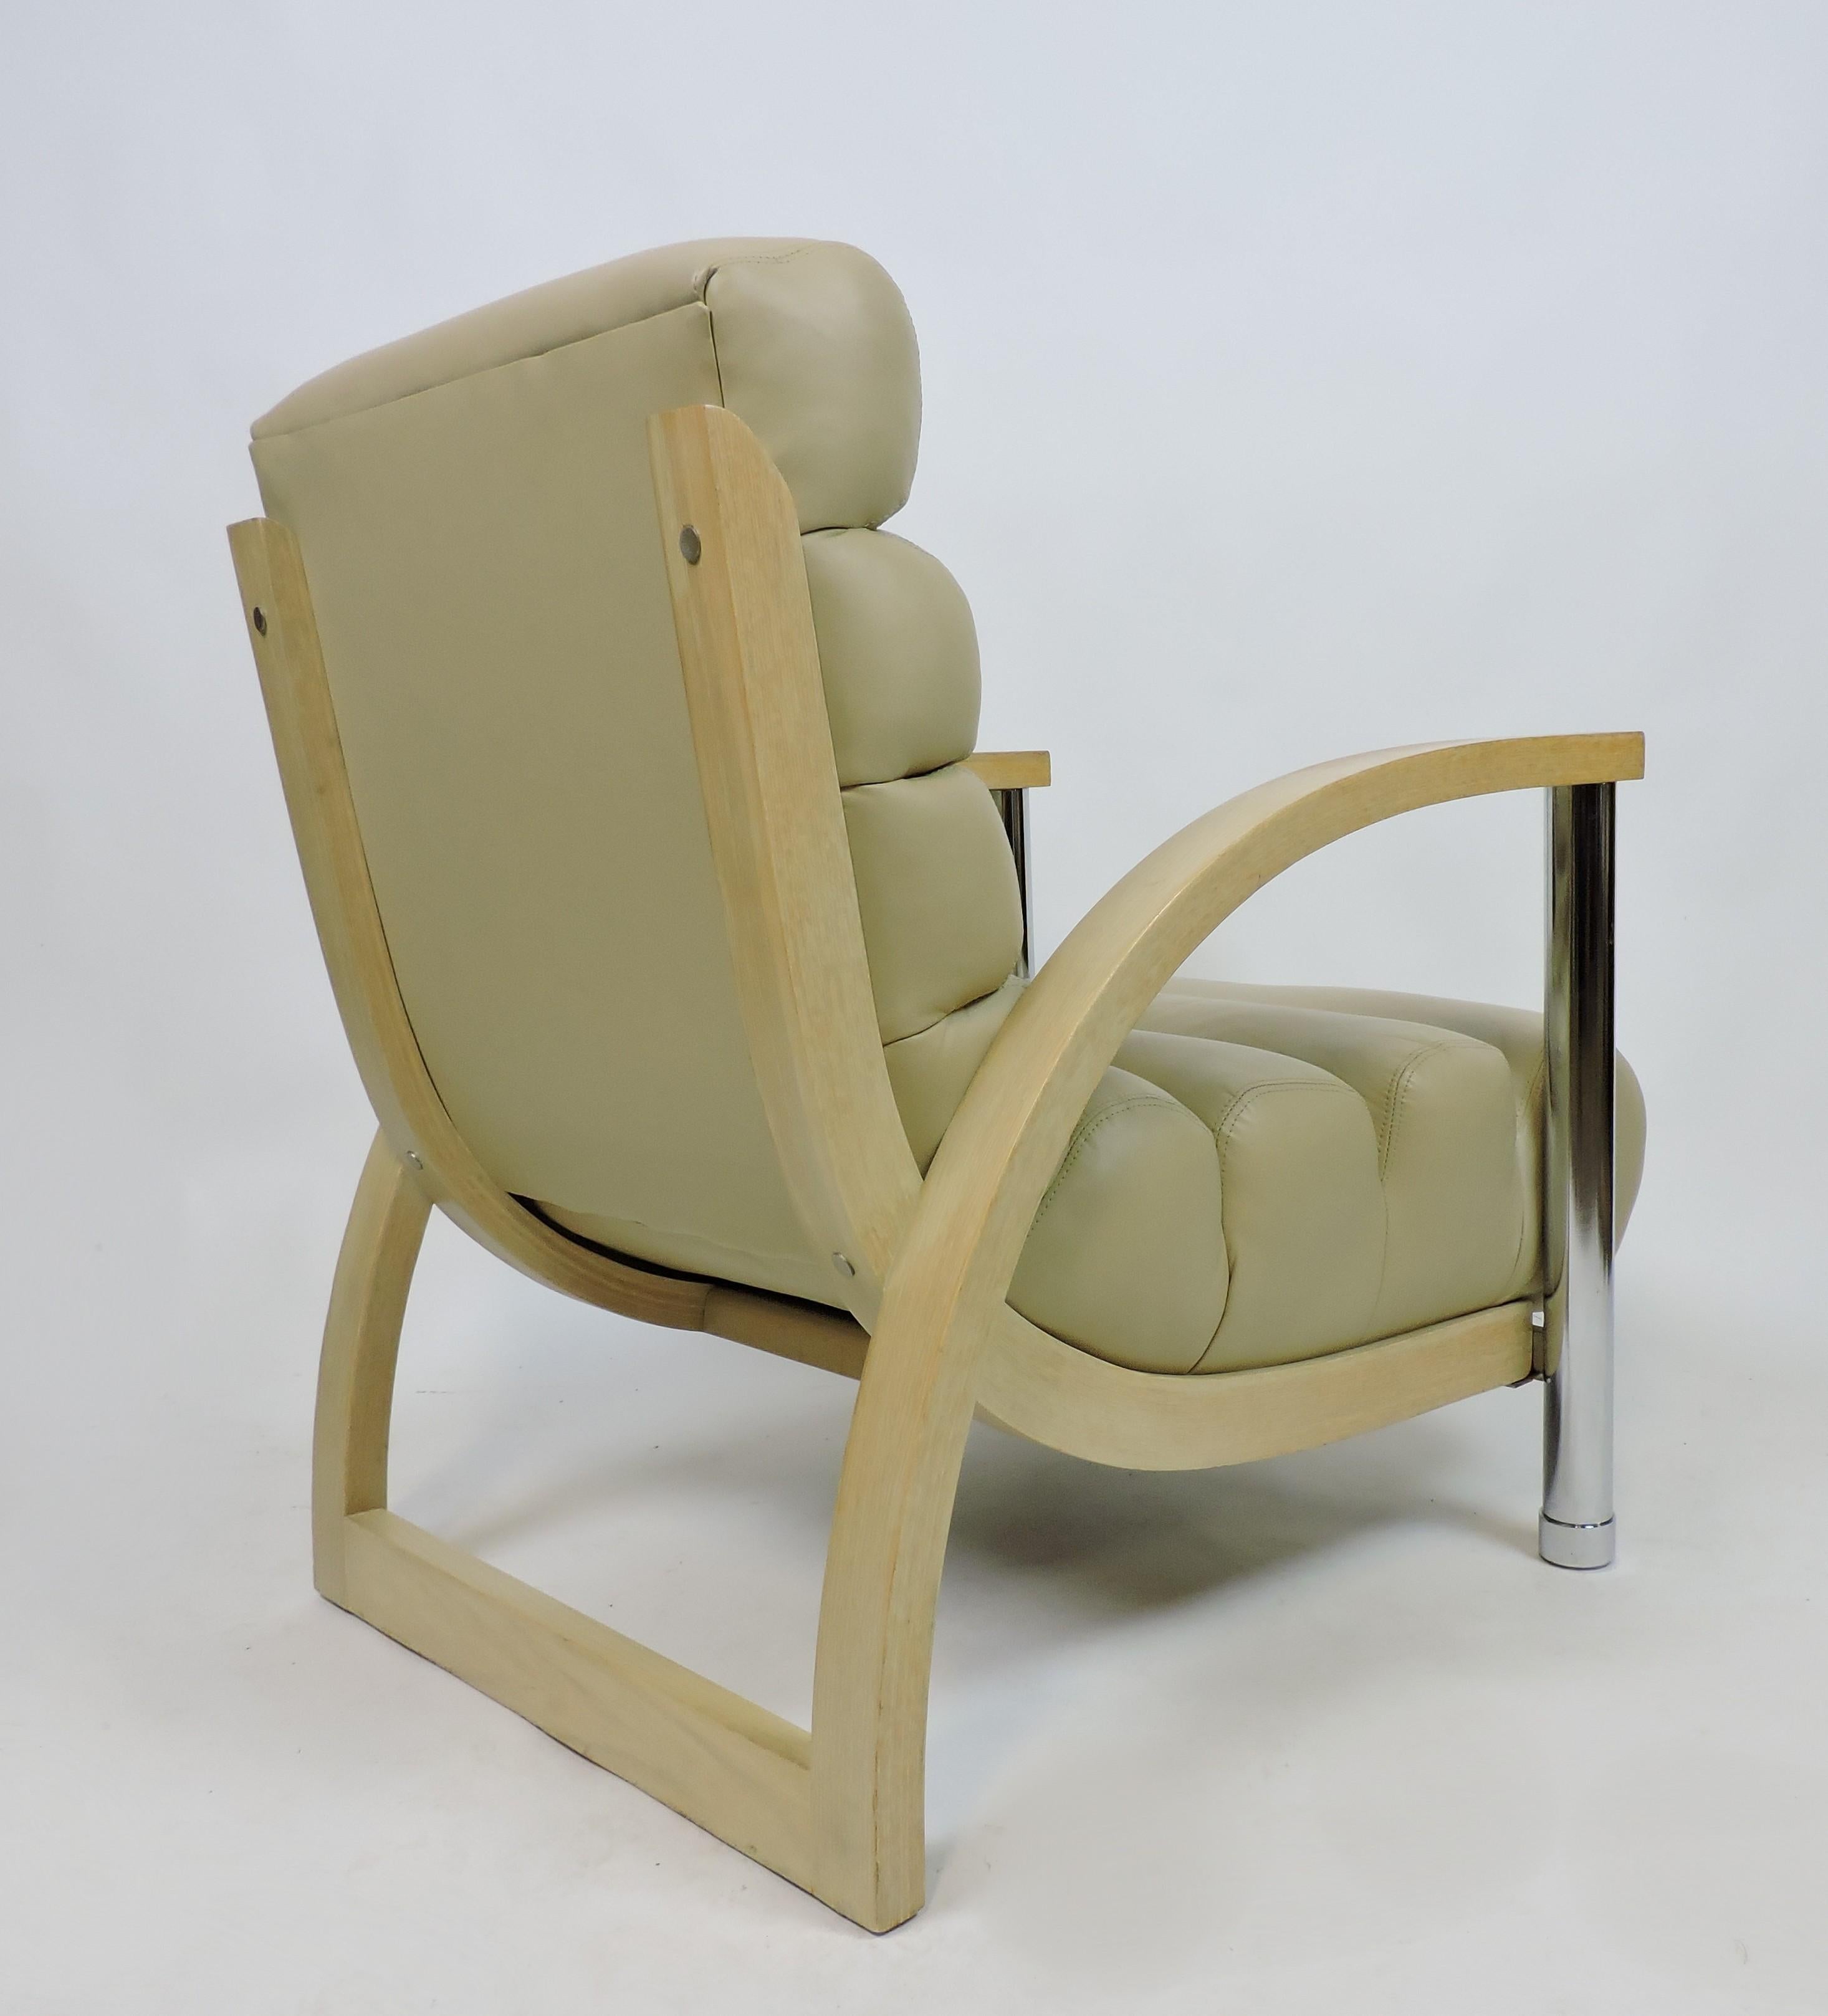 Striking looking and comfortable Eclipse lounge chair designed by Jay Spectre and manufactured by Century Furniture Company. This chair has a channeled leather cushion supported by arcs of light oak that rest on chrome tubular front legs.